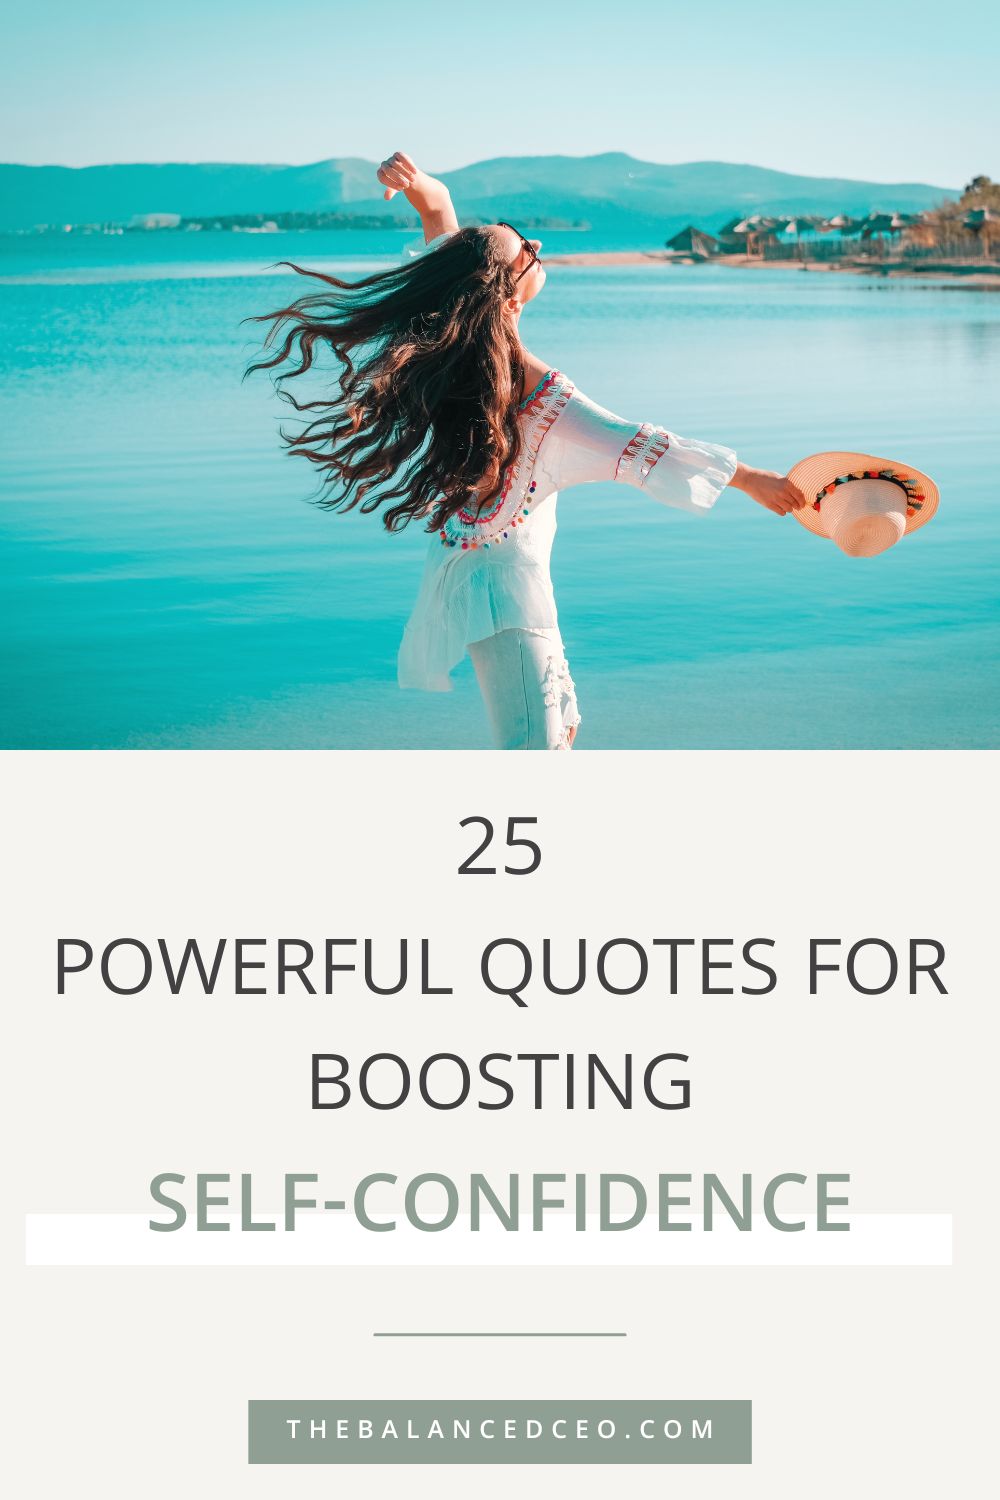 25 Powerful Quotes for Boosting Self-Confidence